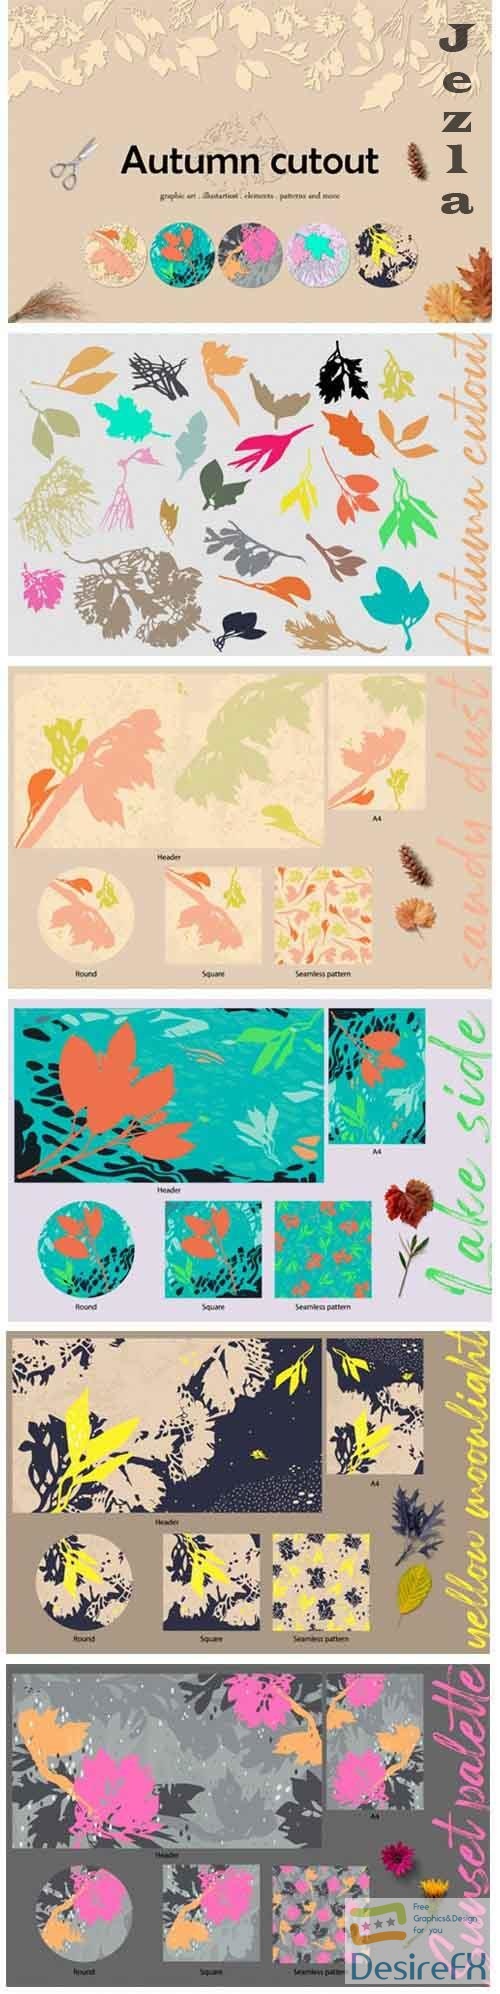 Autumn cutout: graphic art and more - 5339981